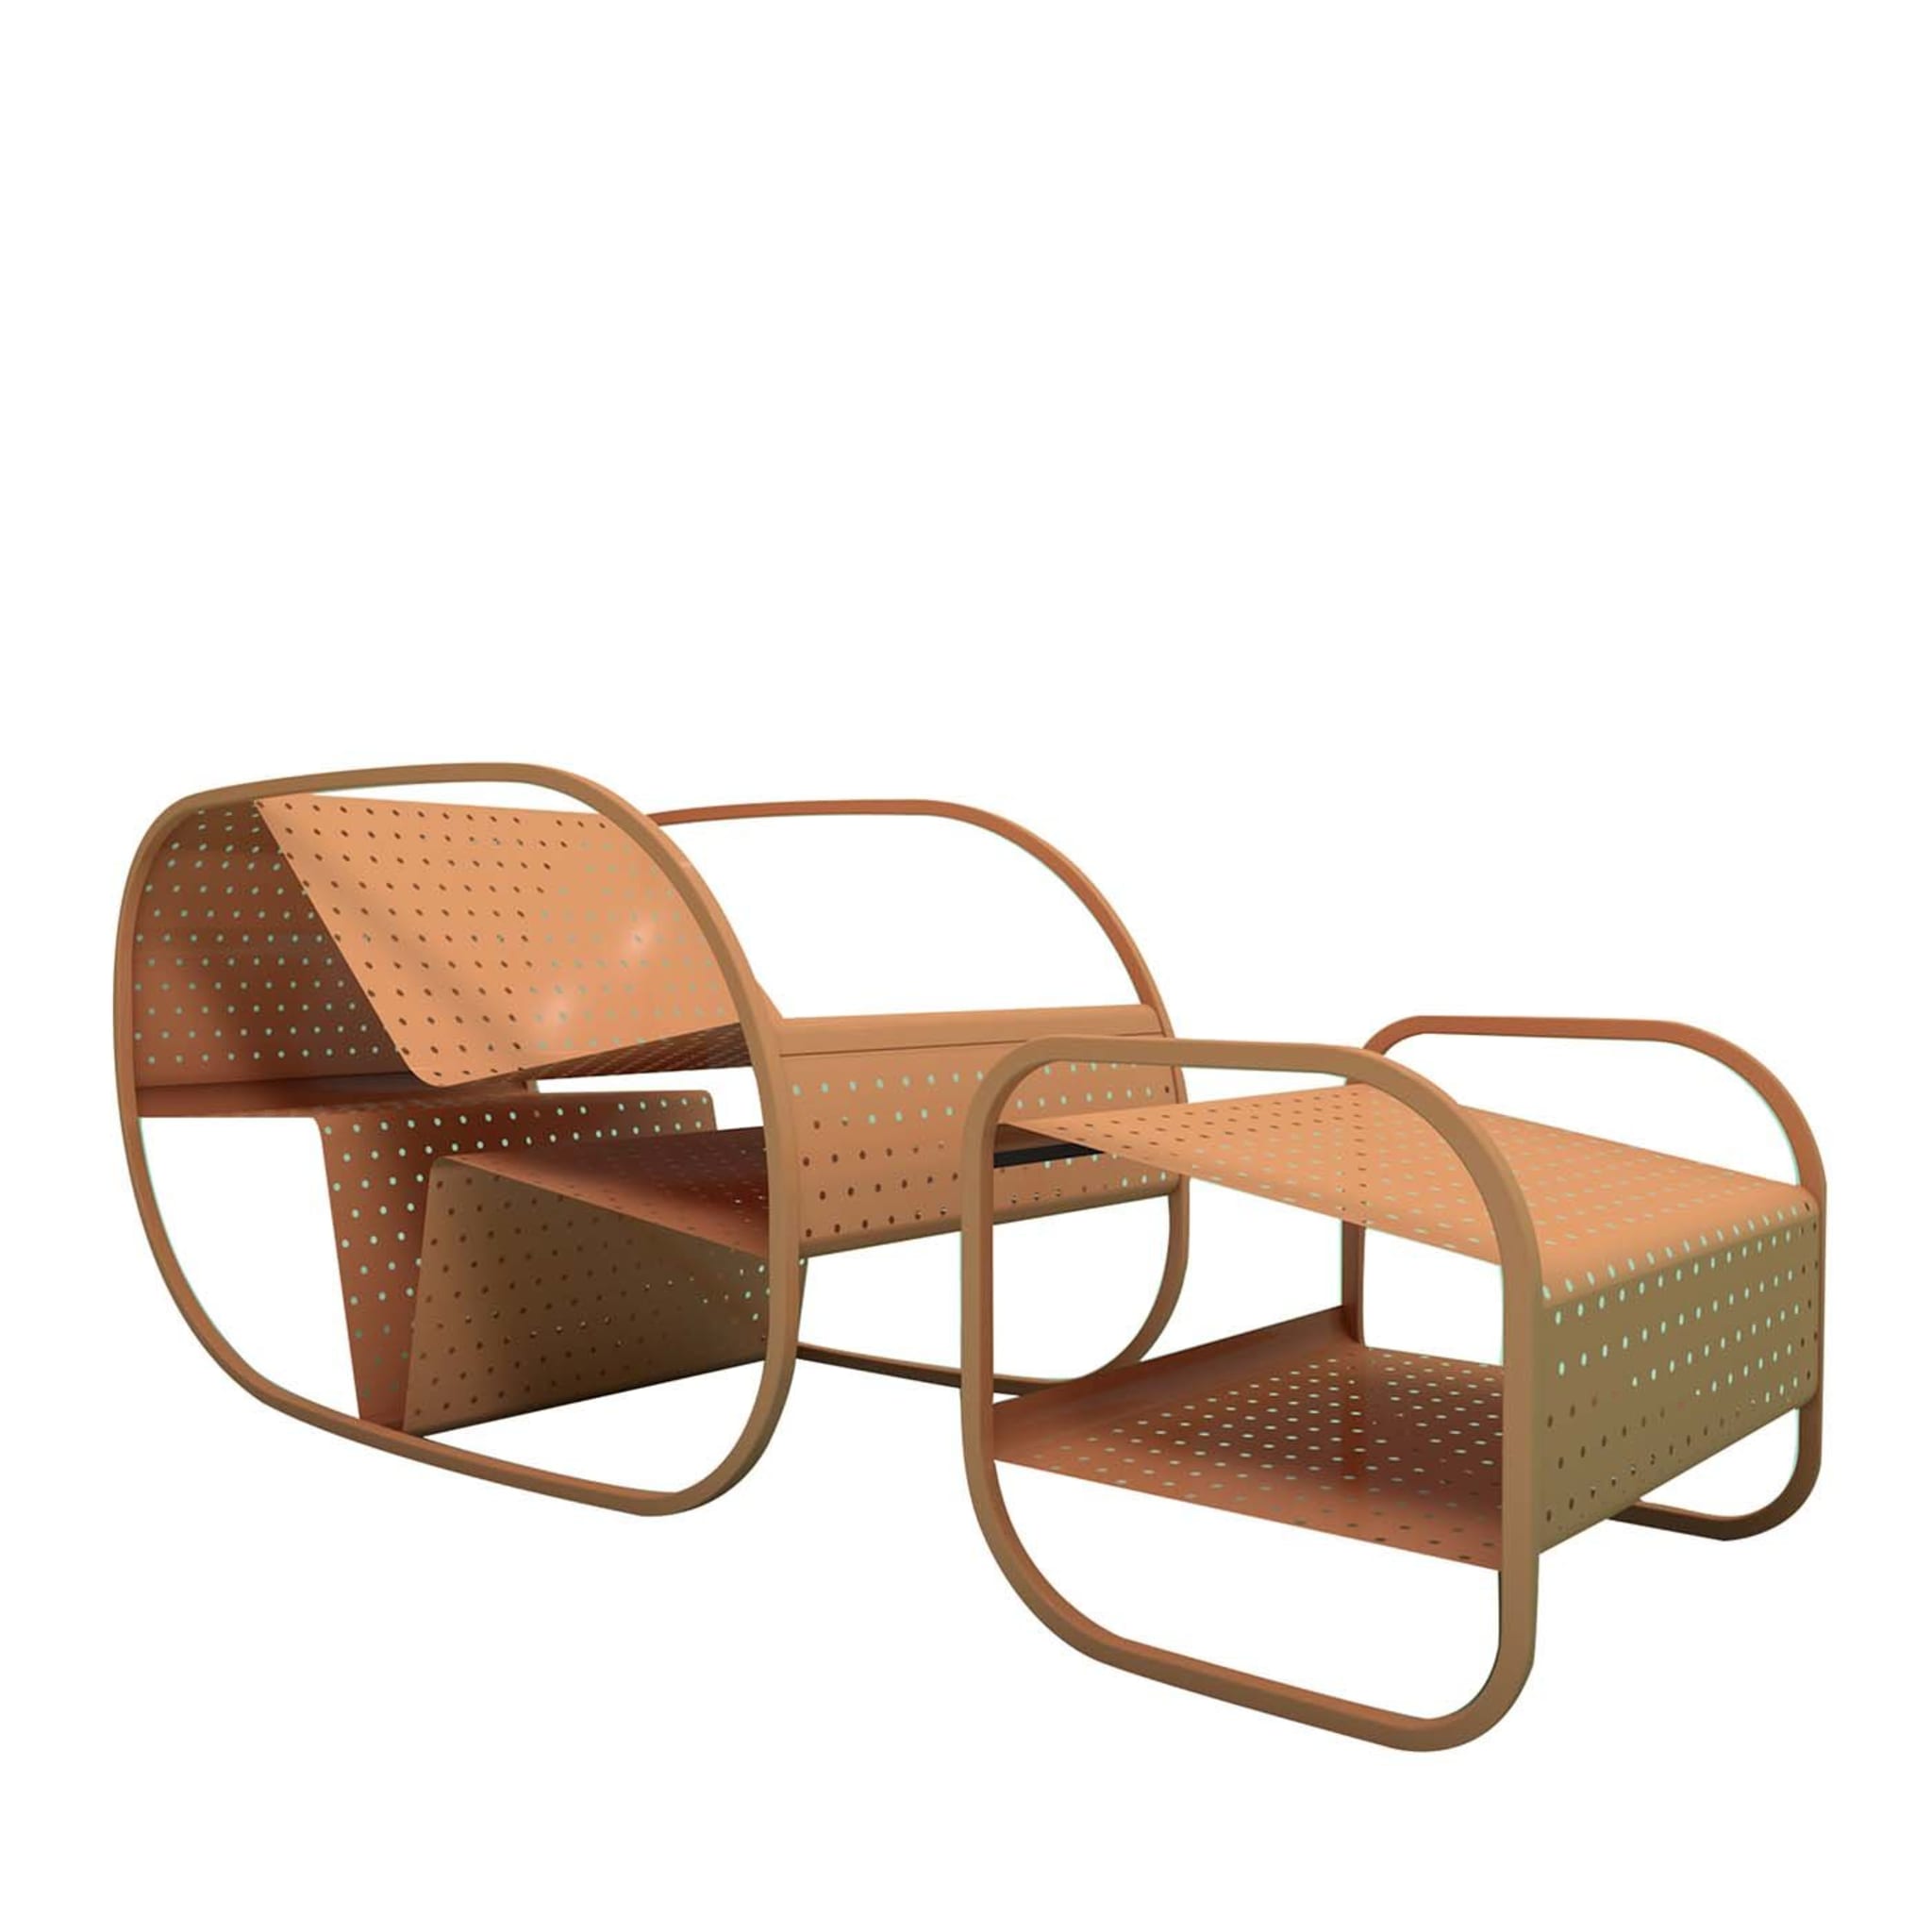 Flip Melon Seat and Sidetable by Salomé Hazan - Main view